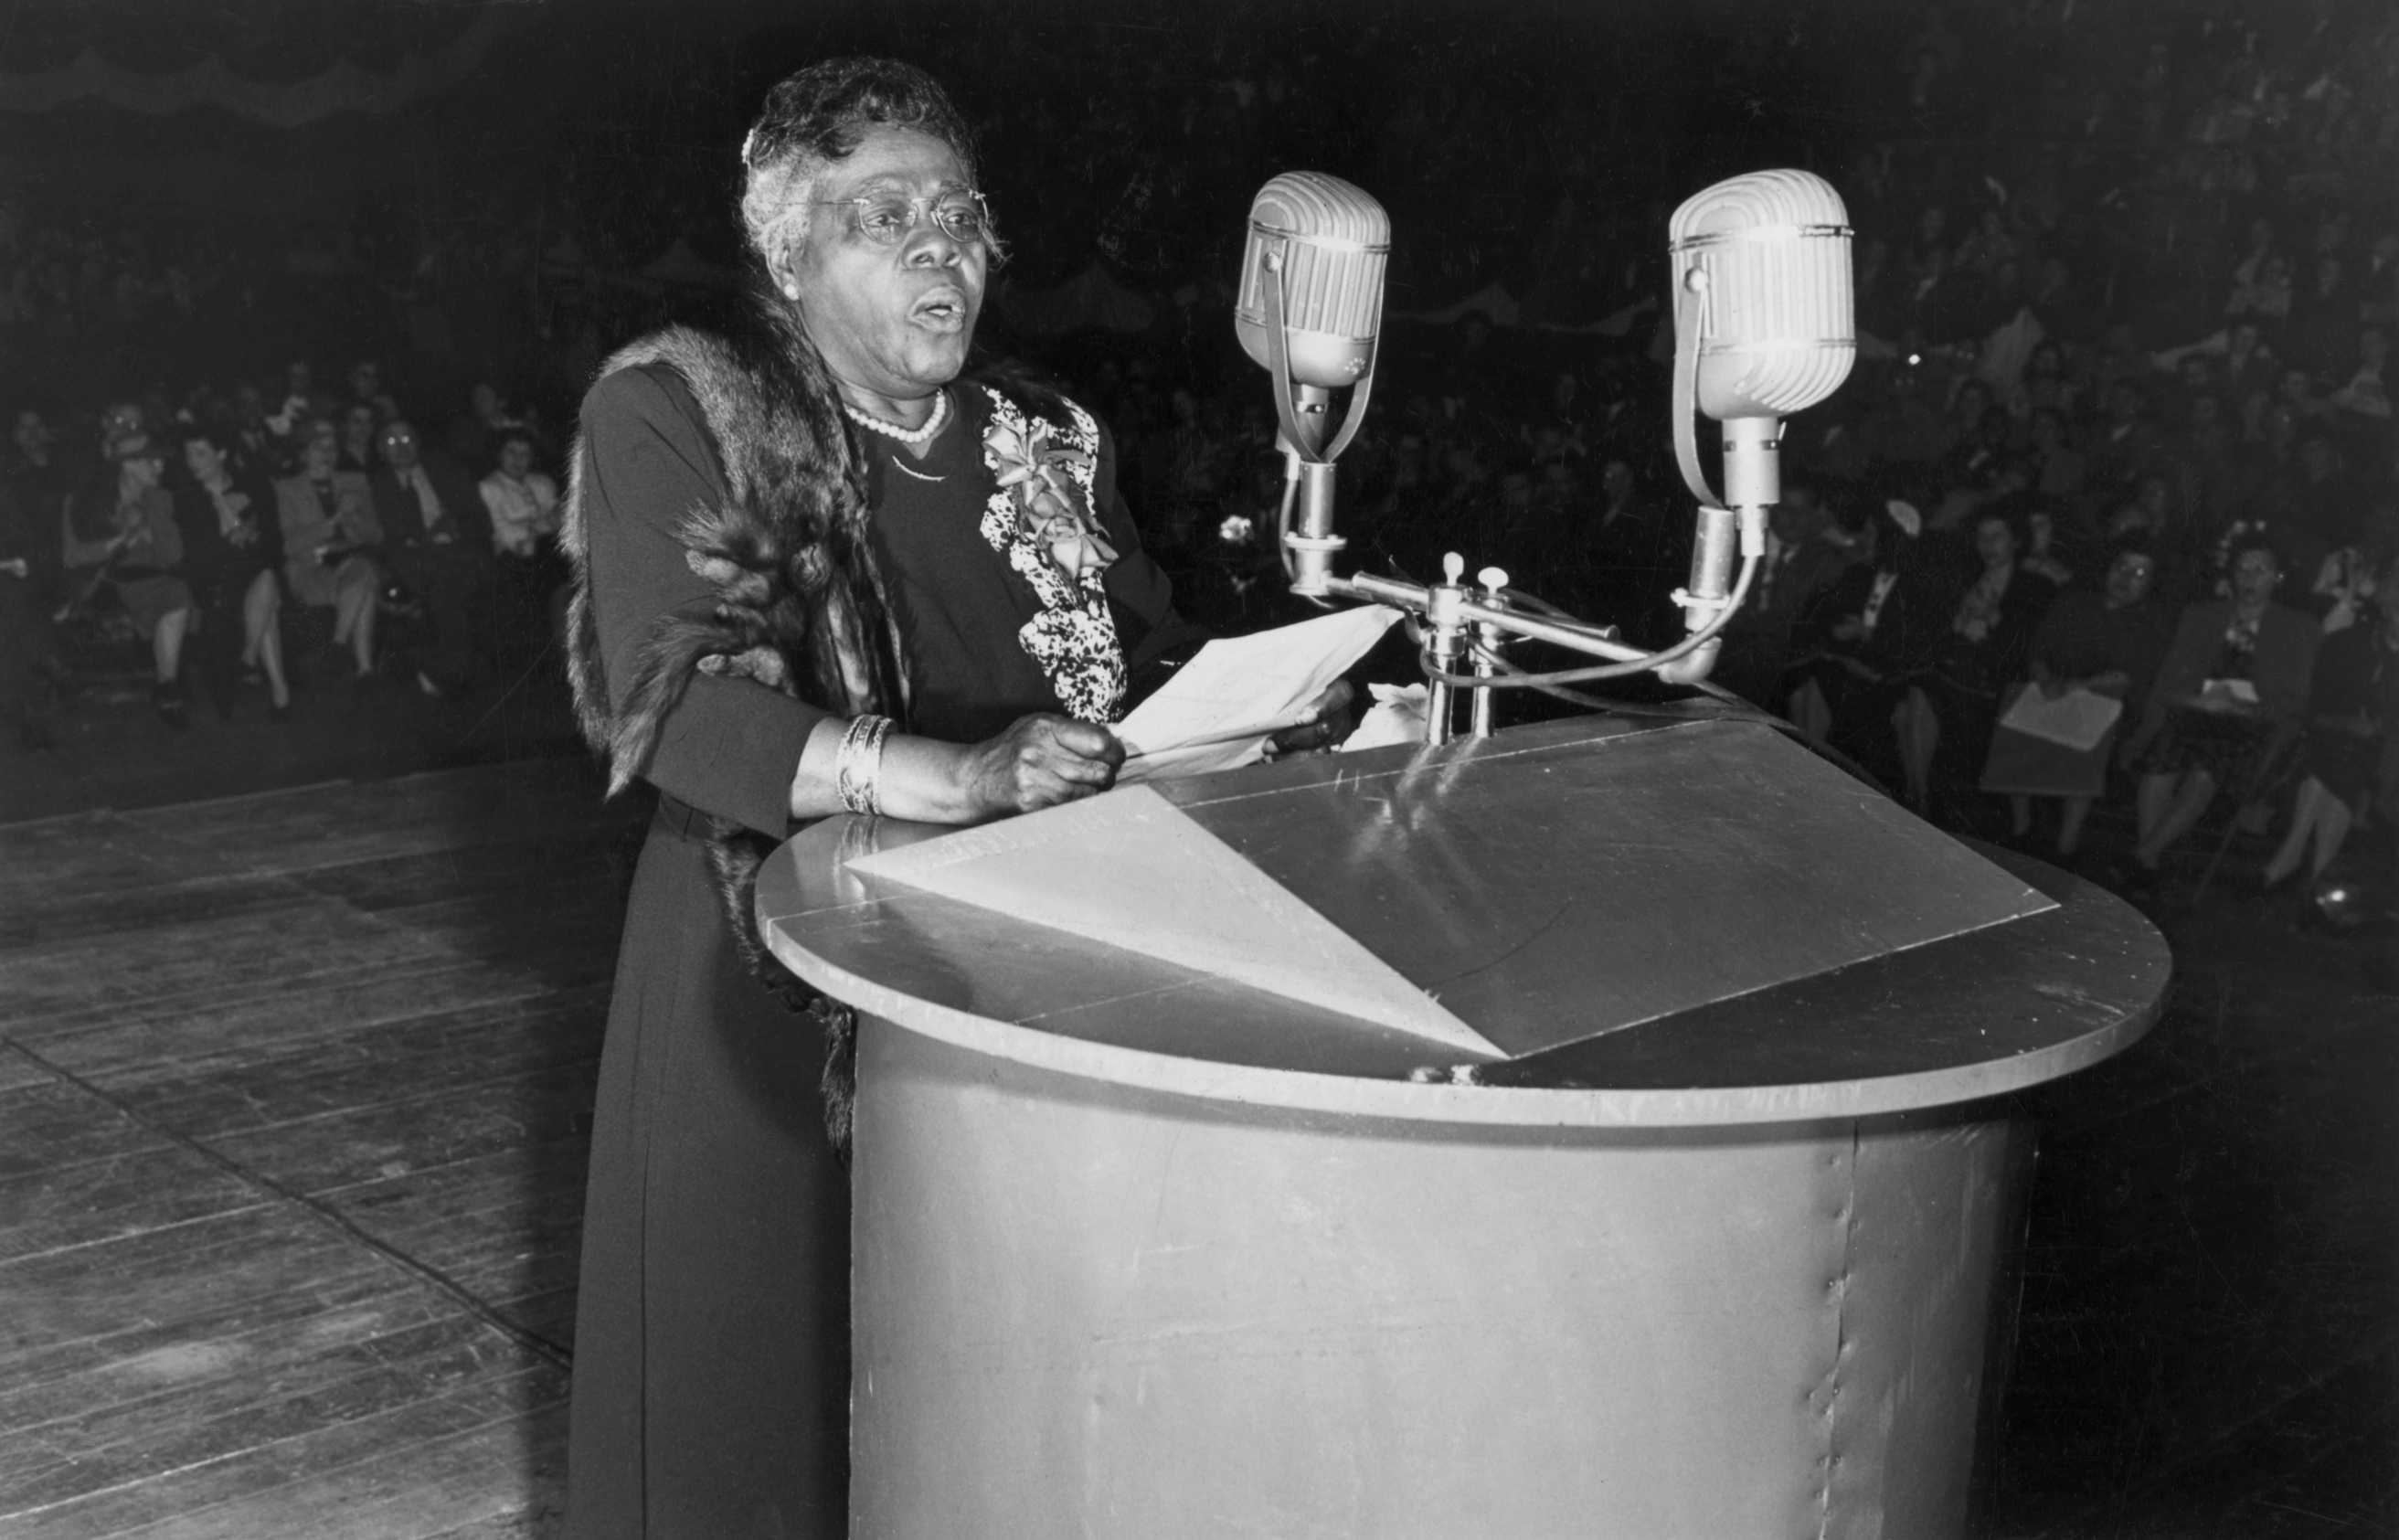 Photograph of Mary McLeod Bethune speaks to an audience at Madison Square Garden, New York City